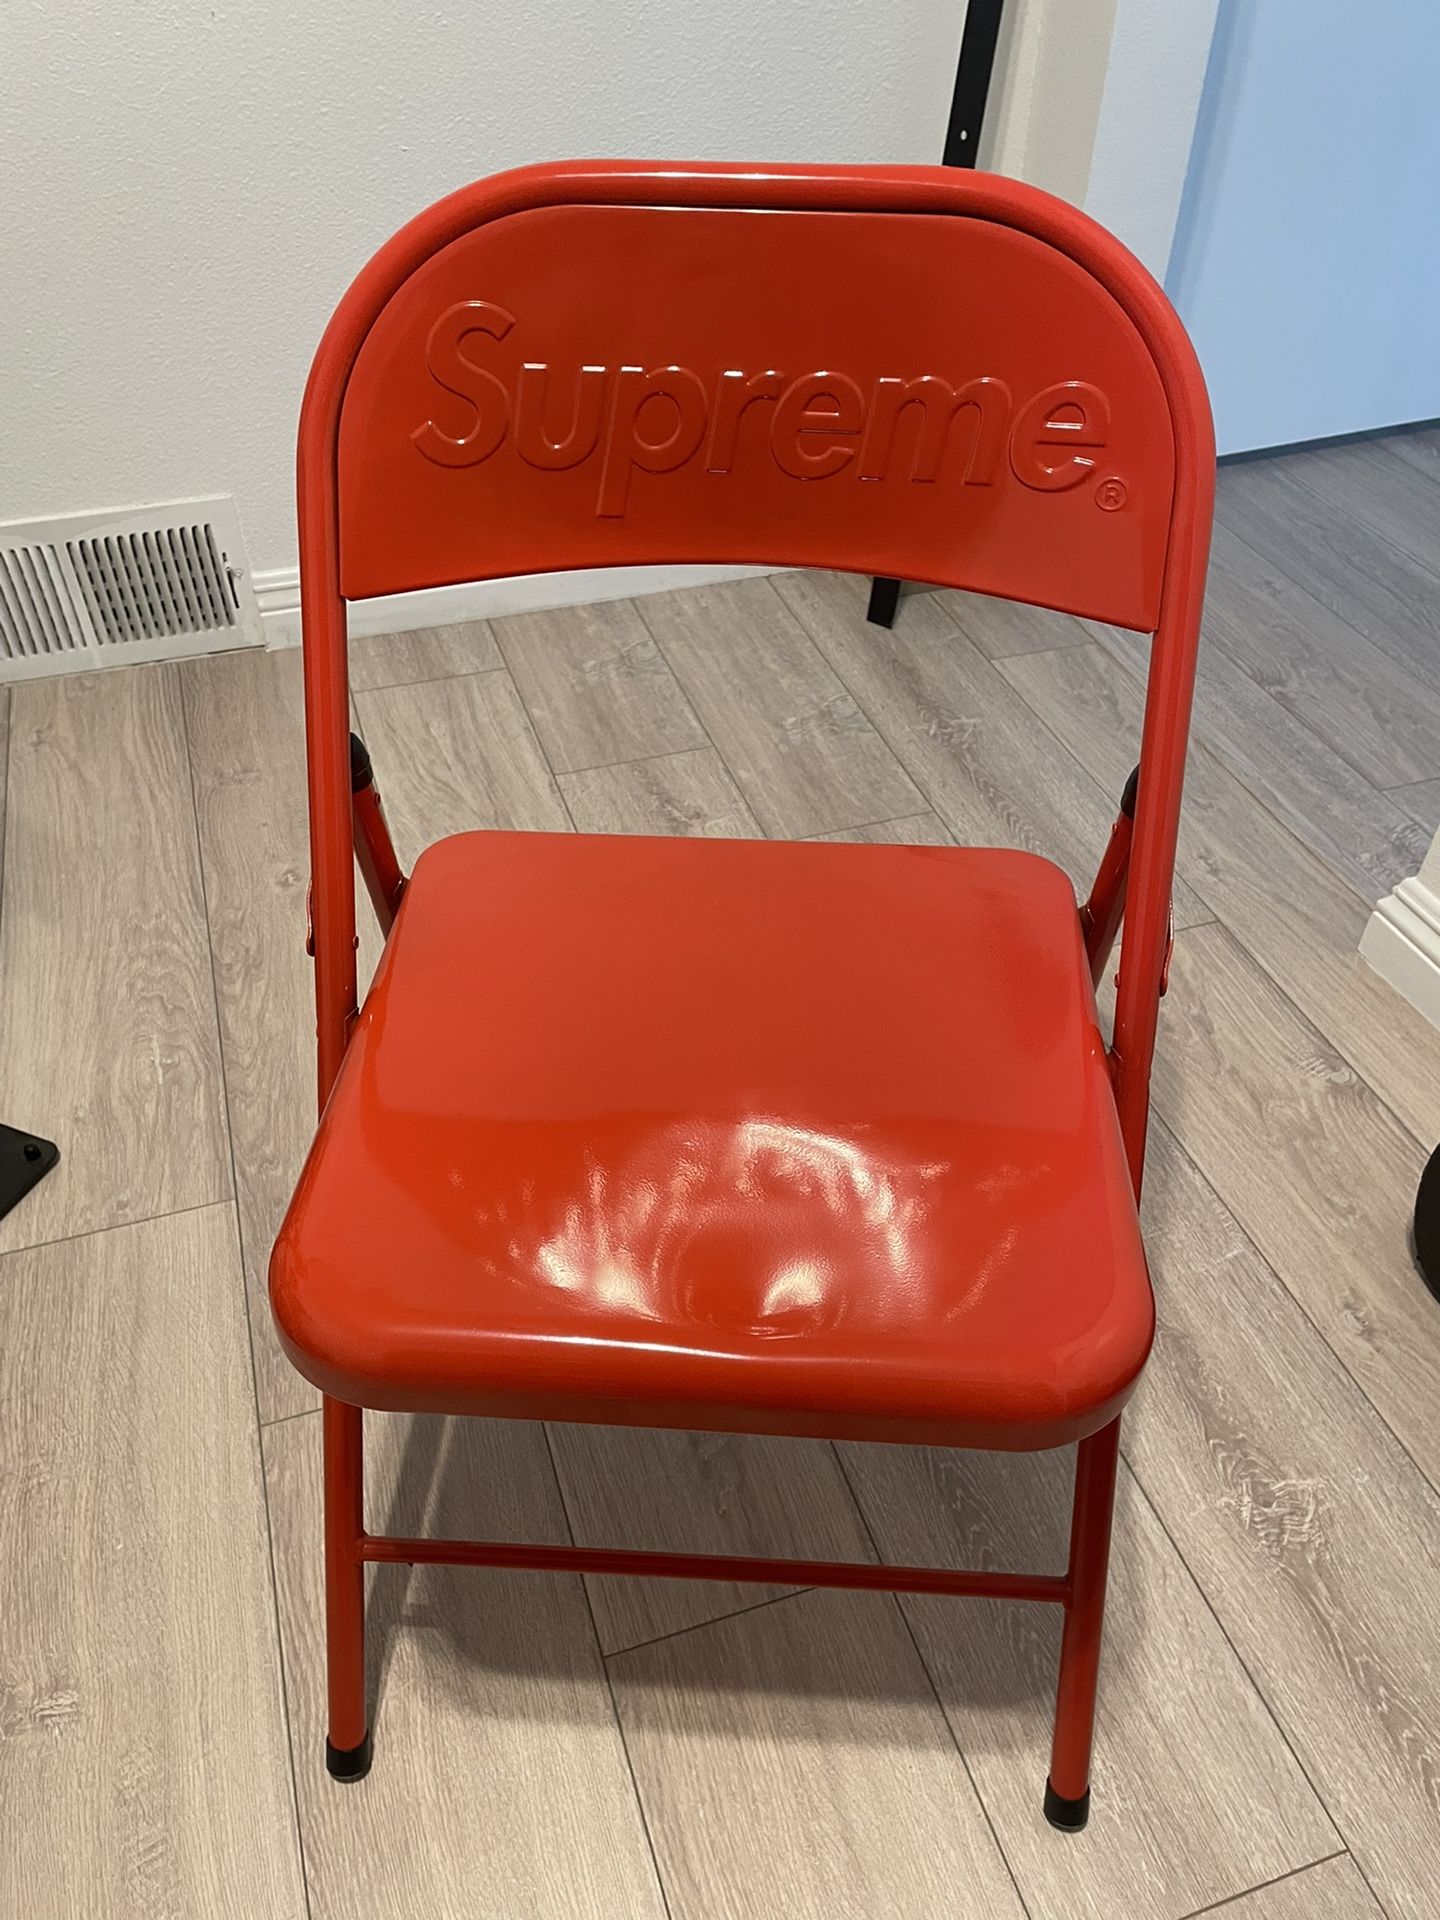 Supreme Metal Folding Chair for Sale in Chino Hills, CA   OfferUp